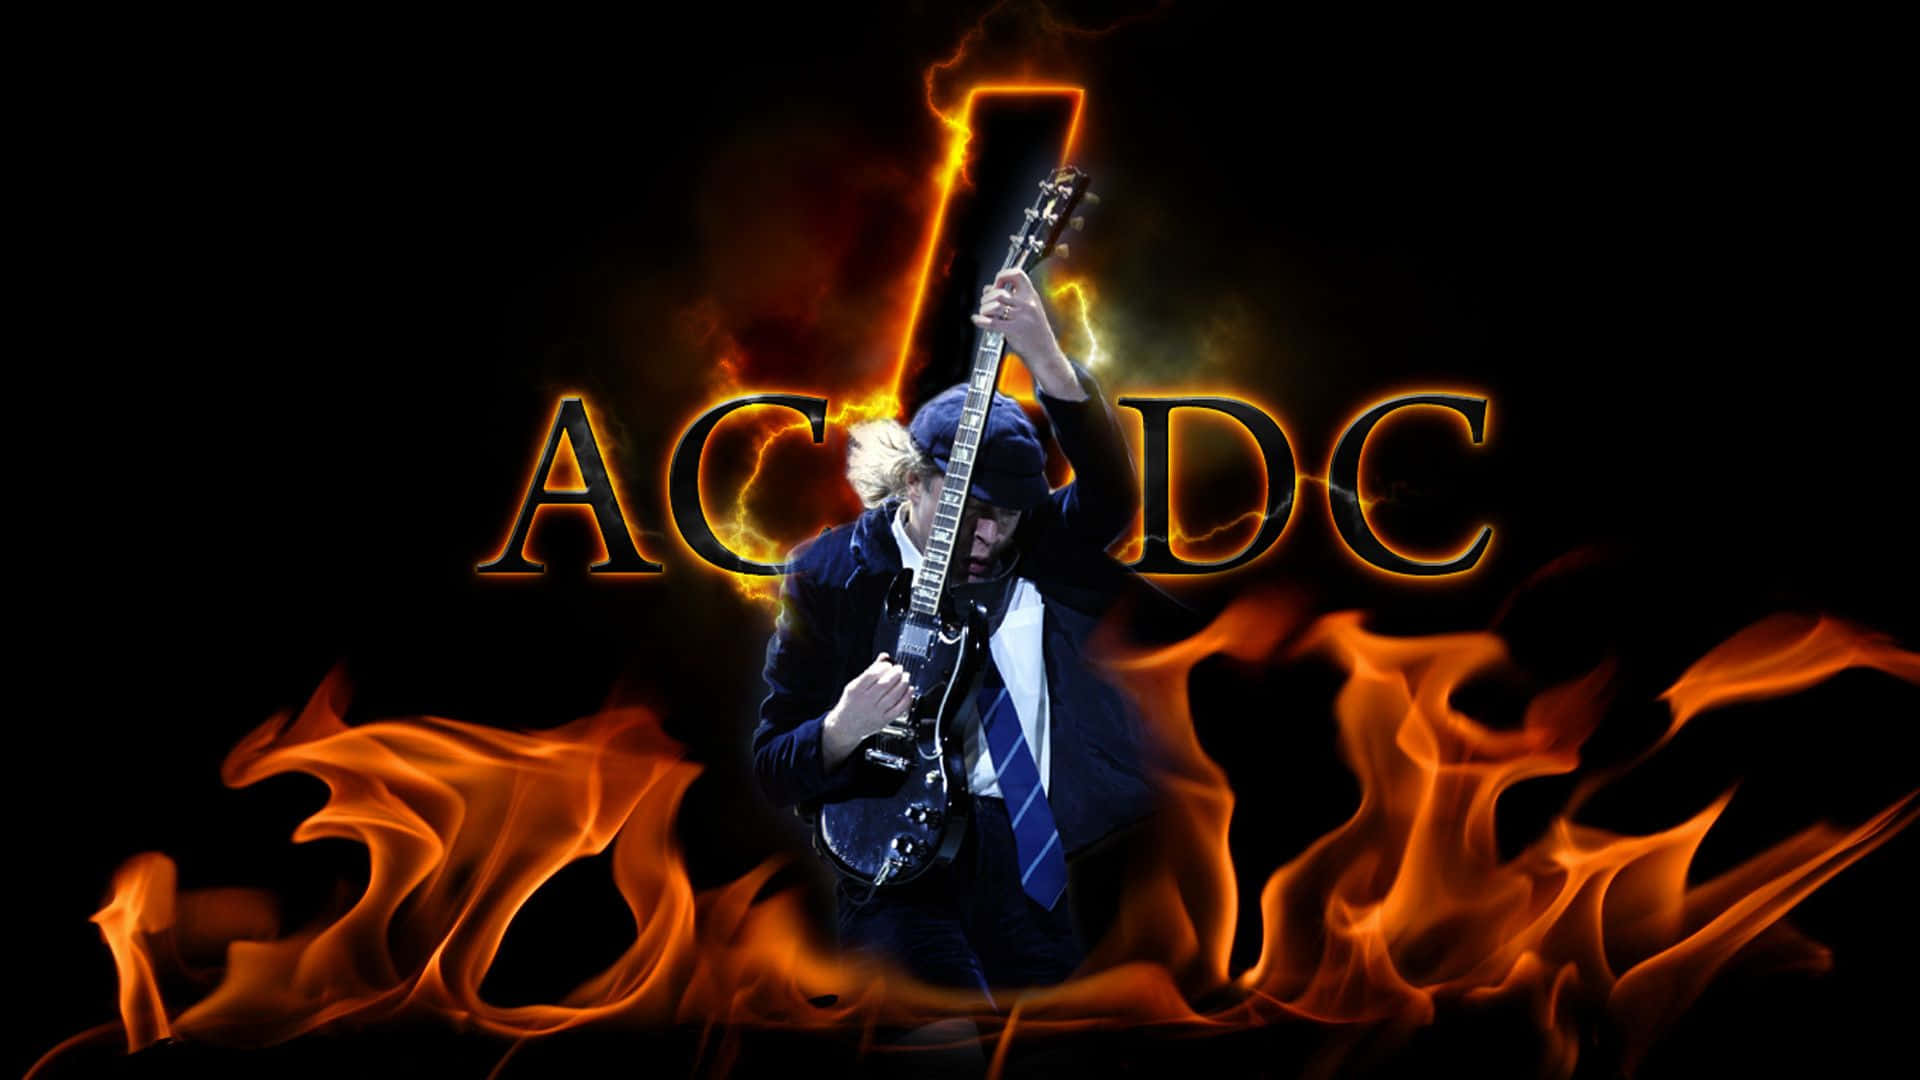 Ac Dc salutes their fellow inductees at the Rock and Roll Hall of Fame. Wallpaper